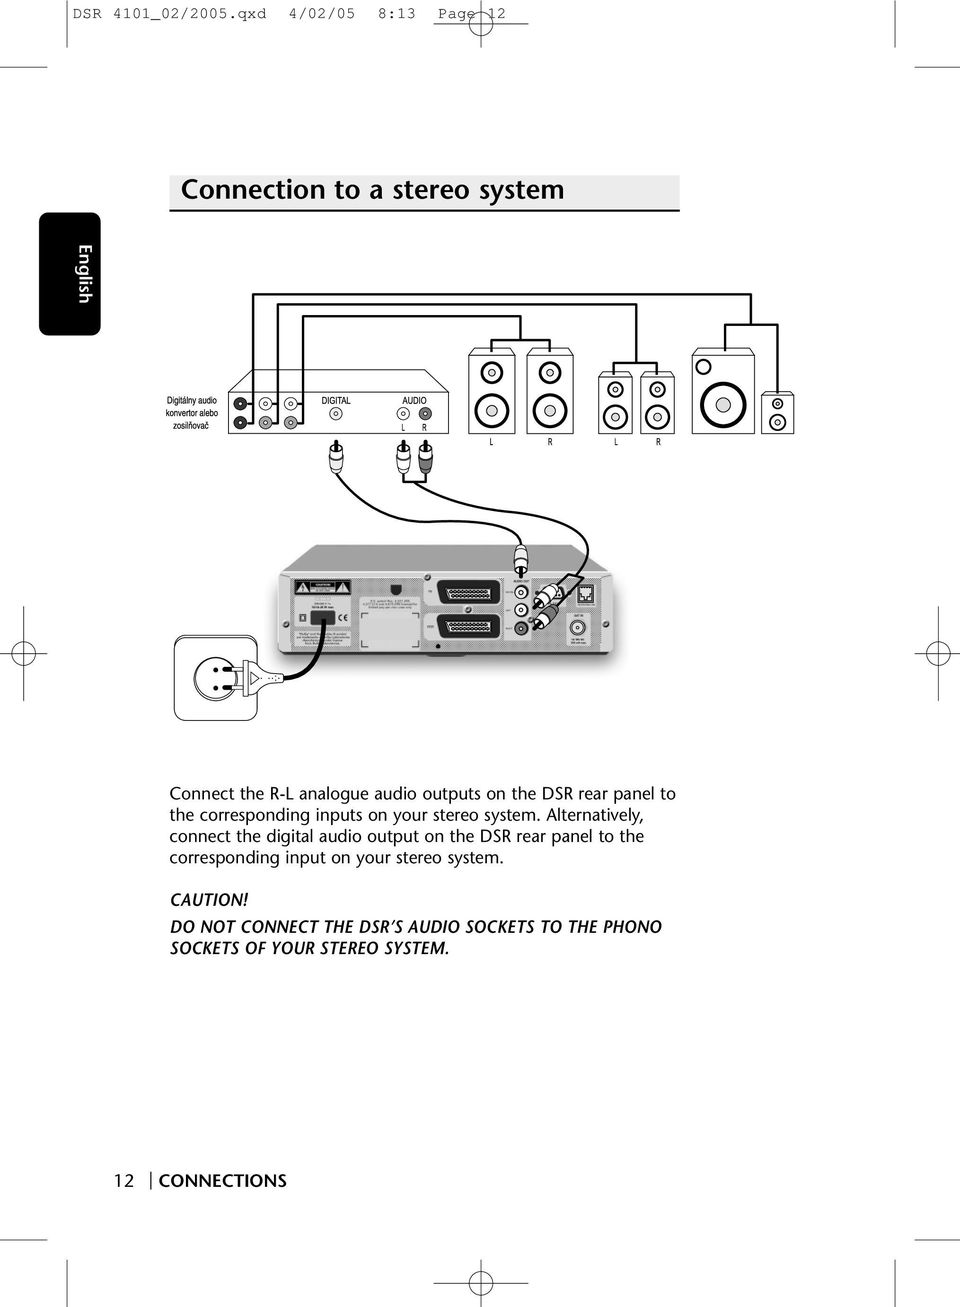 the DSR rear panel to the corresponding inputs on your stereo system.